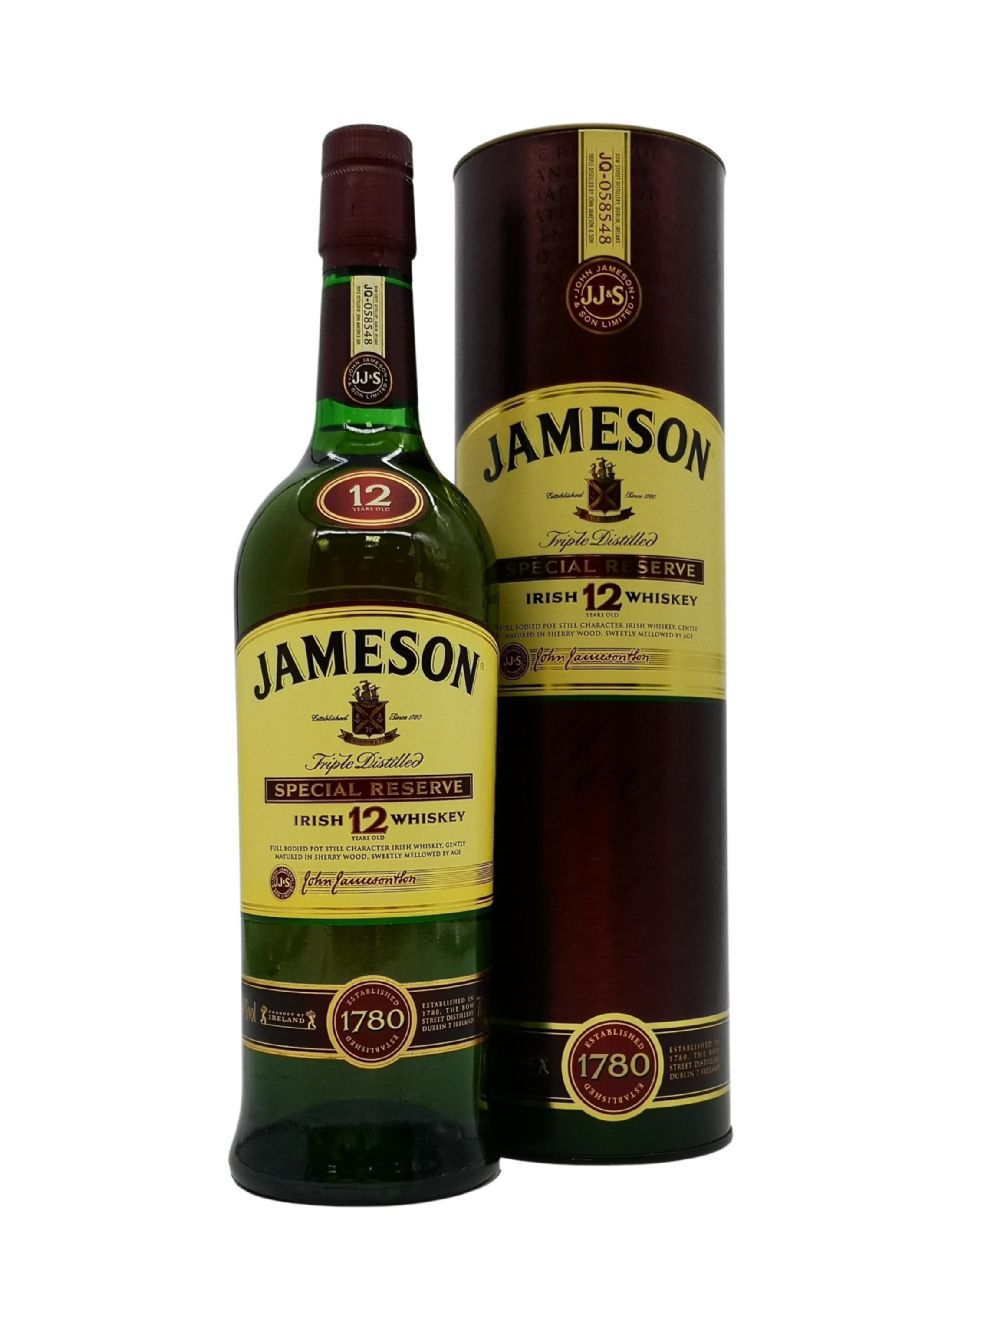 Jameson 12 year old Special Reserve